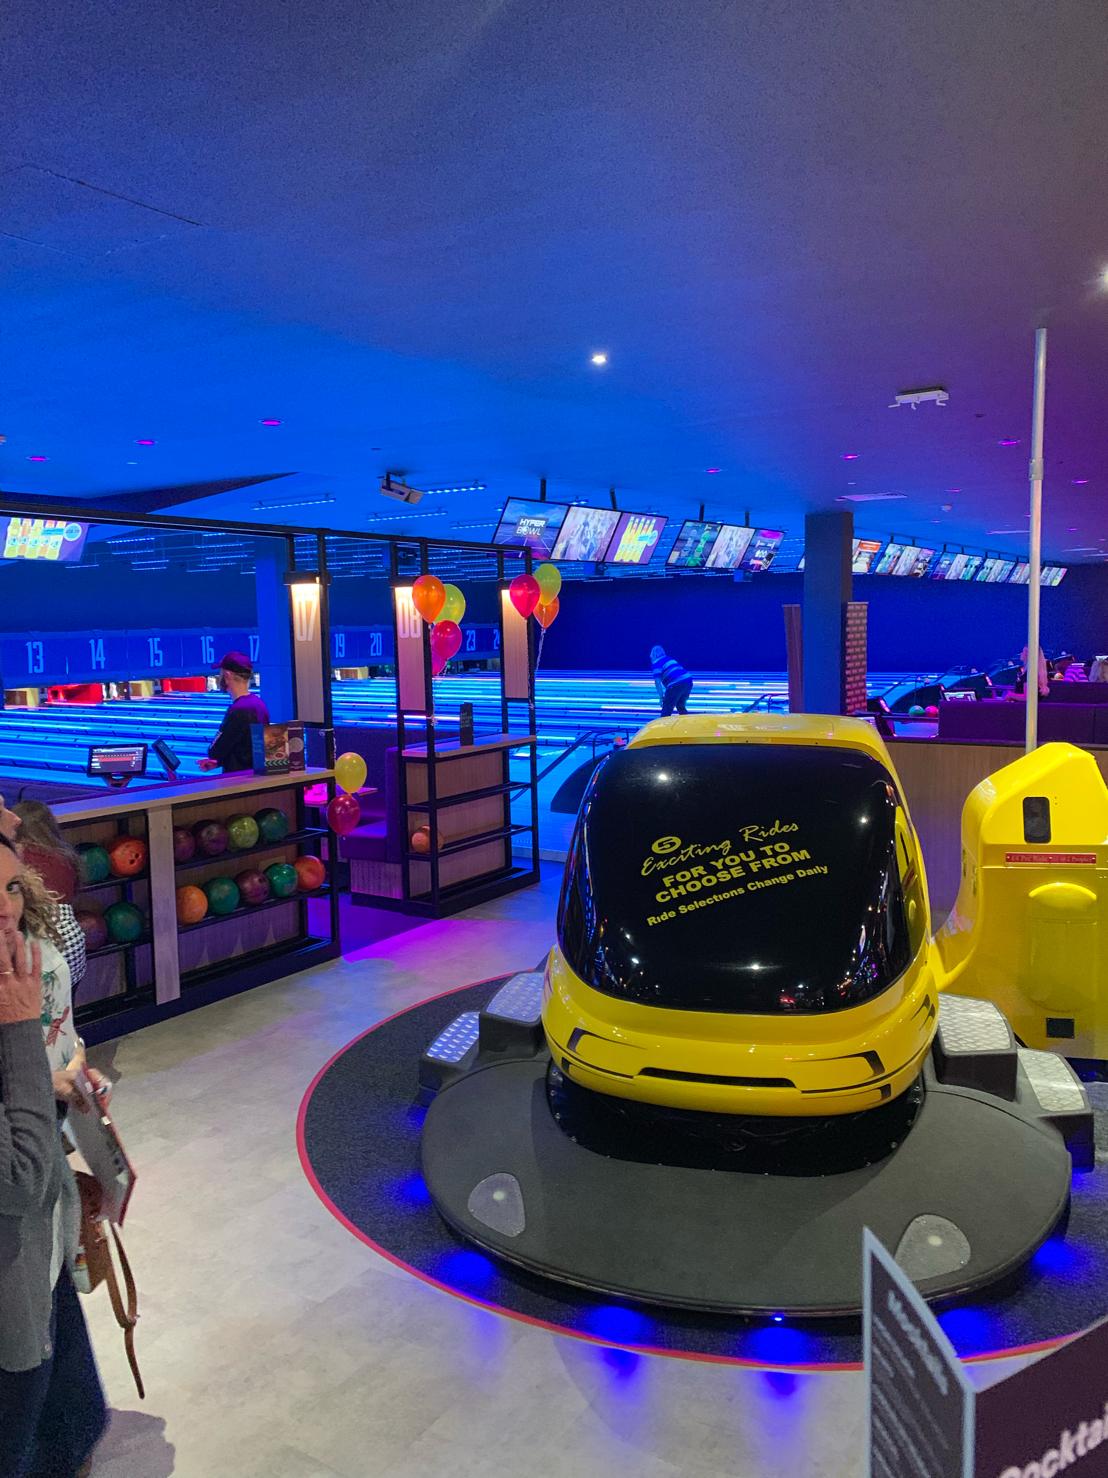 Ventola Projects are the shining light at Cheshire Oaks re-launched Tenpin Entertainment Facility @VentolaLighting